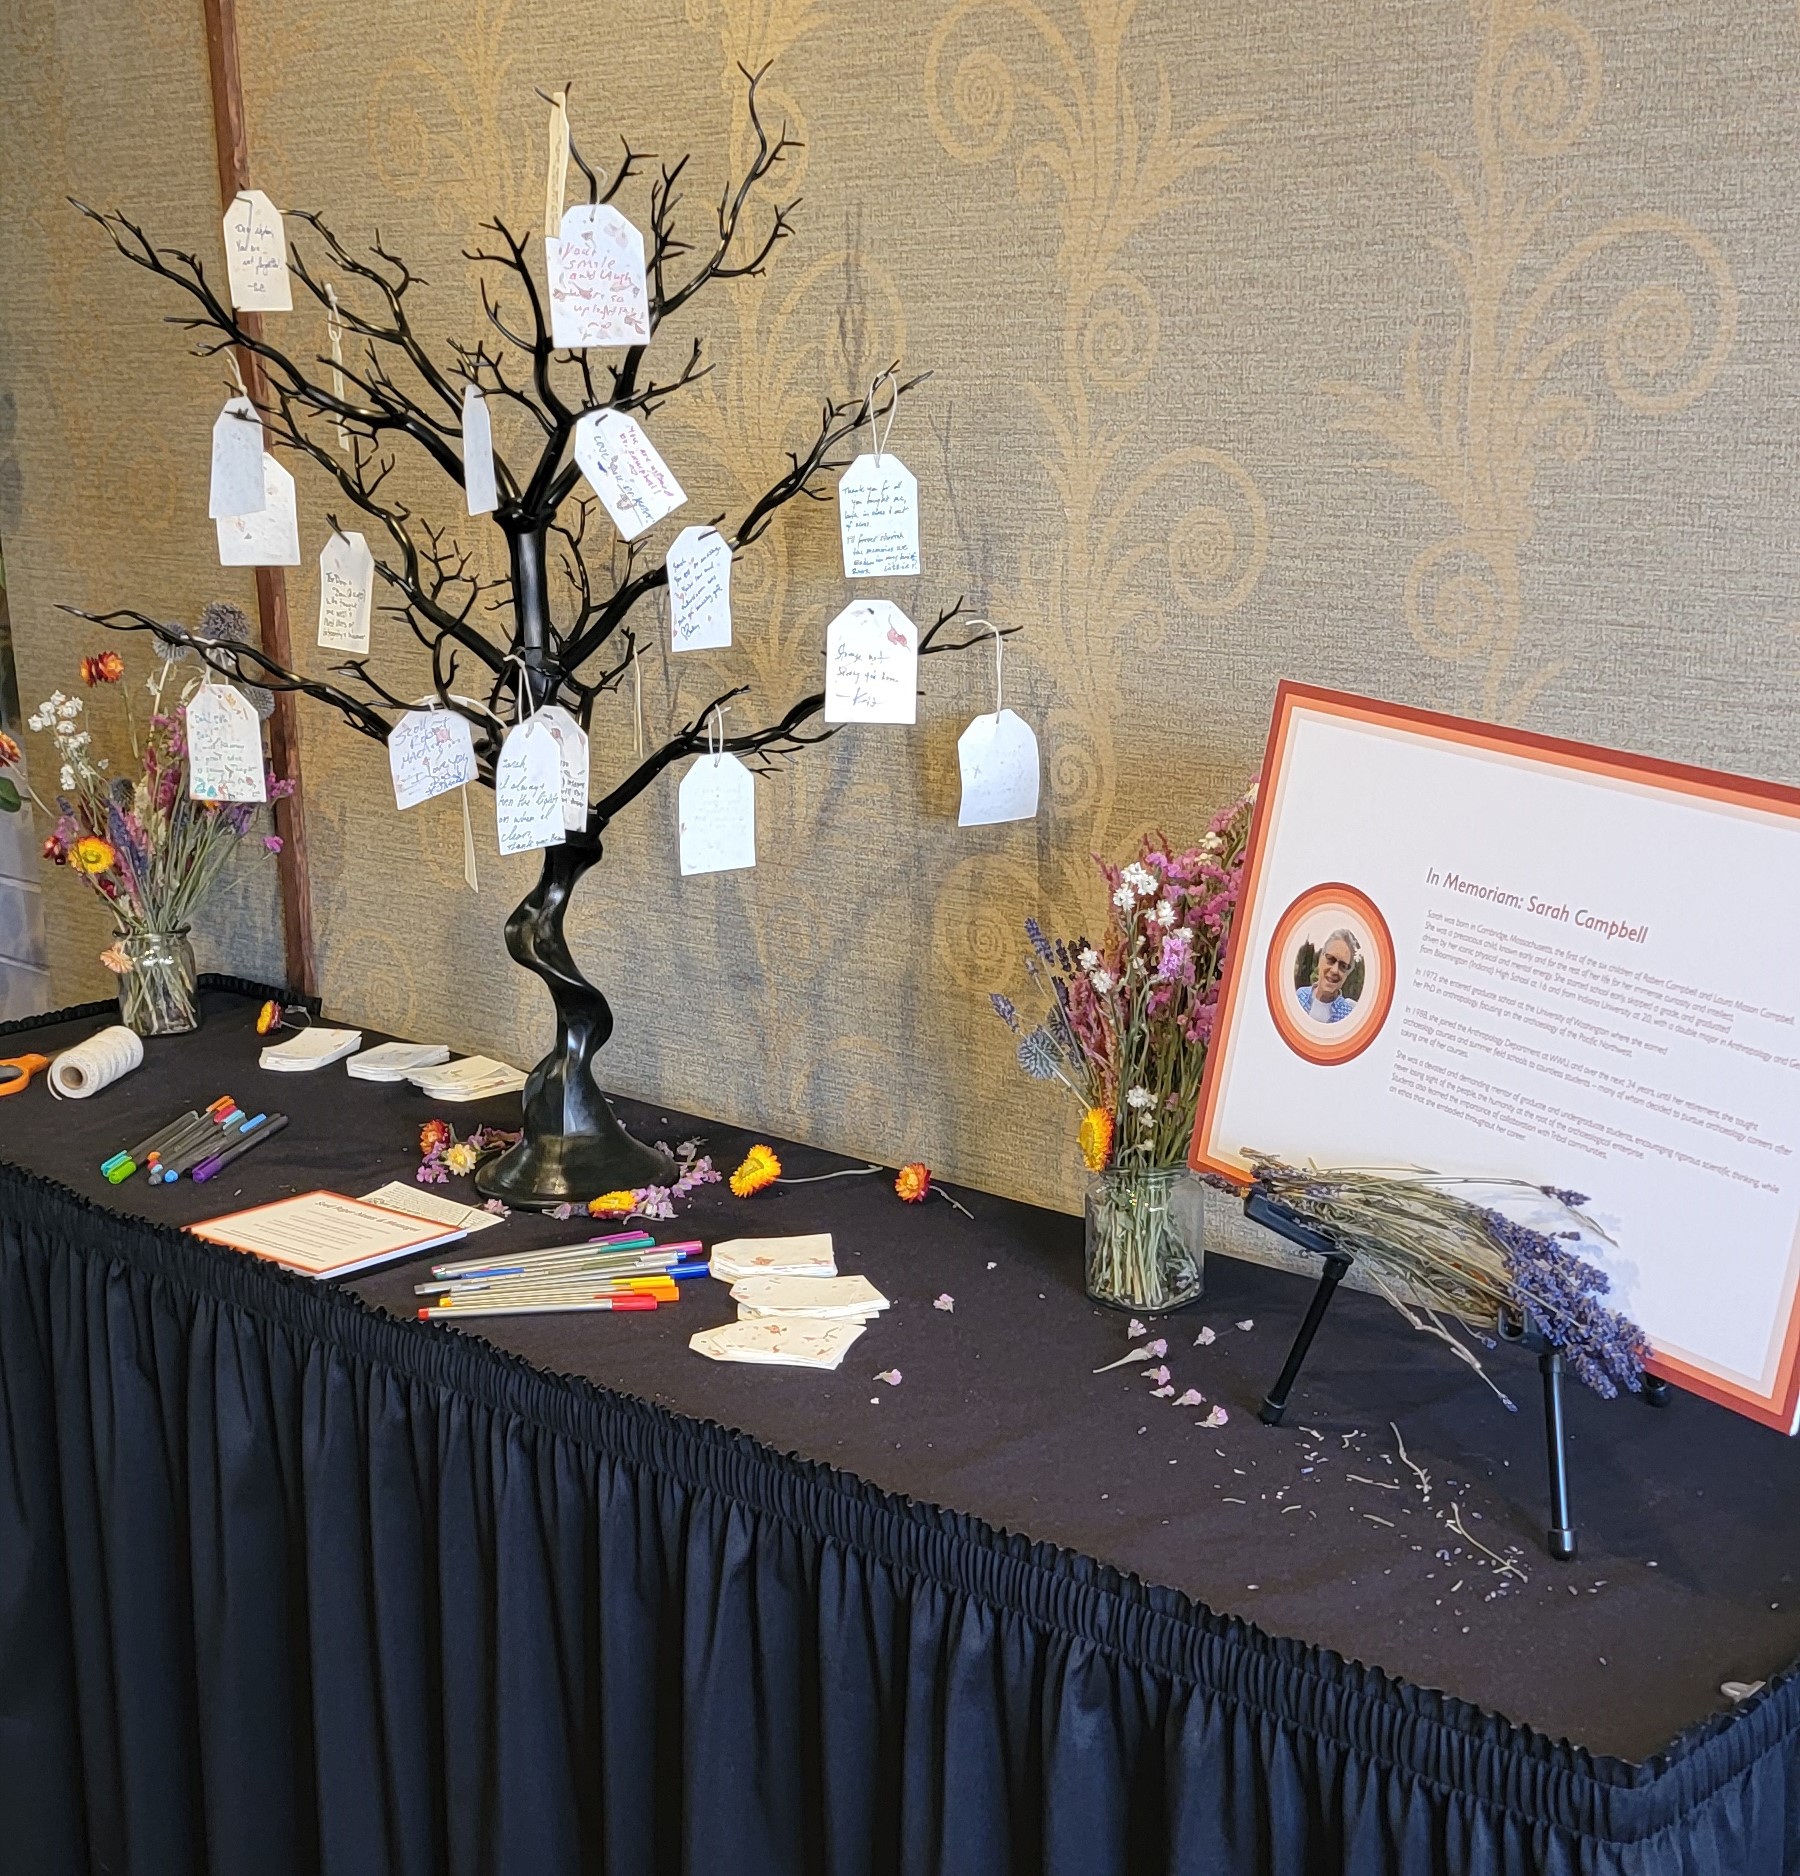 The beautiful memorial table arranged for the late Professor Emerita Sarah Campbell at the 77th Annual Northwest Archaeological Conference of 2024, laden with handwritten notes entailing beloved memories of Sarah. 